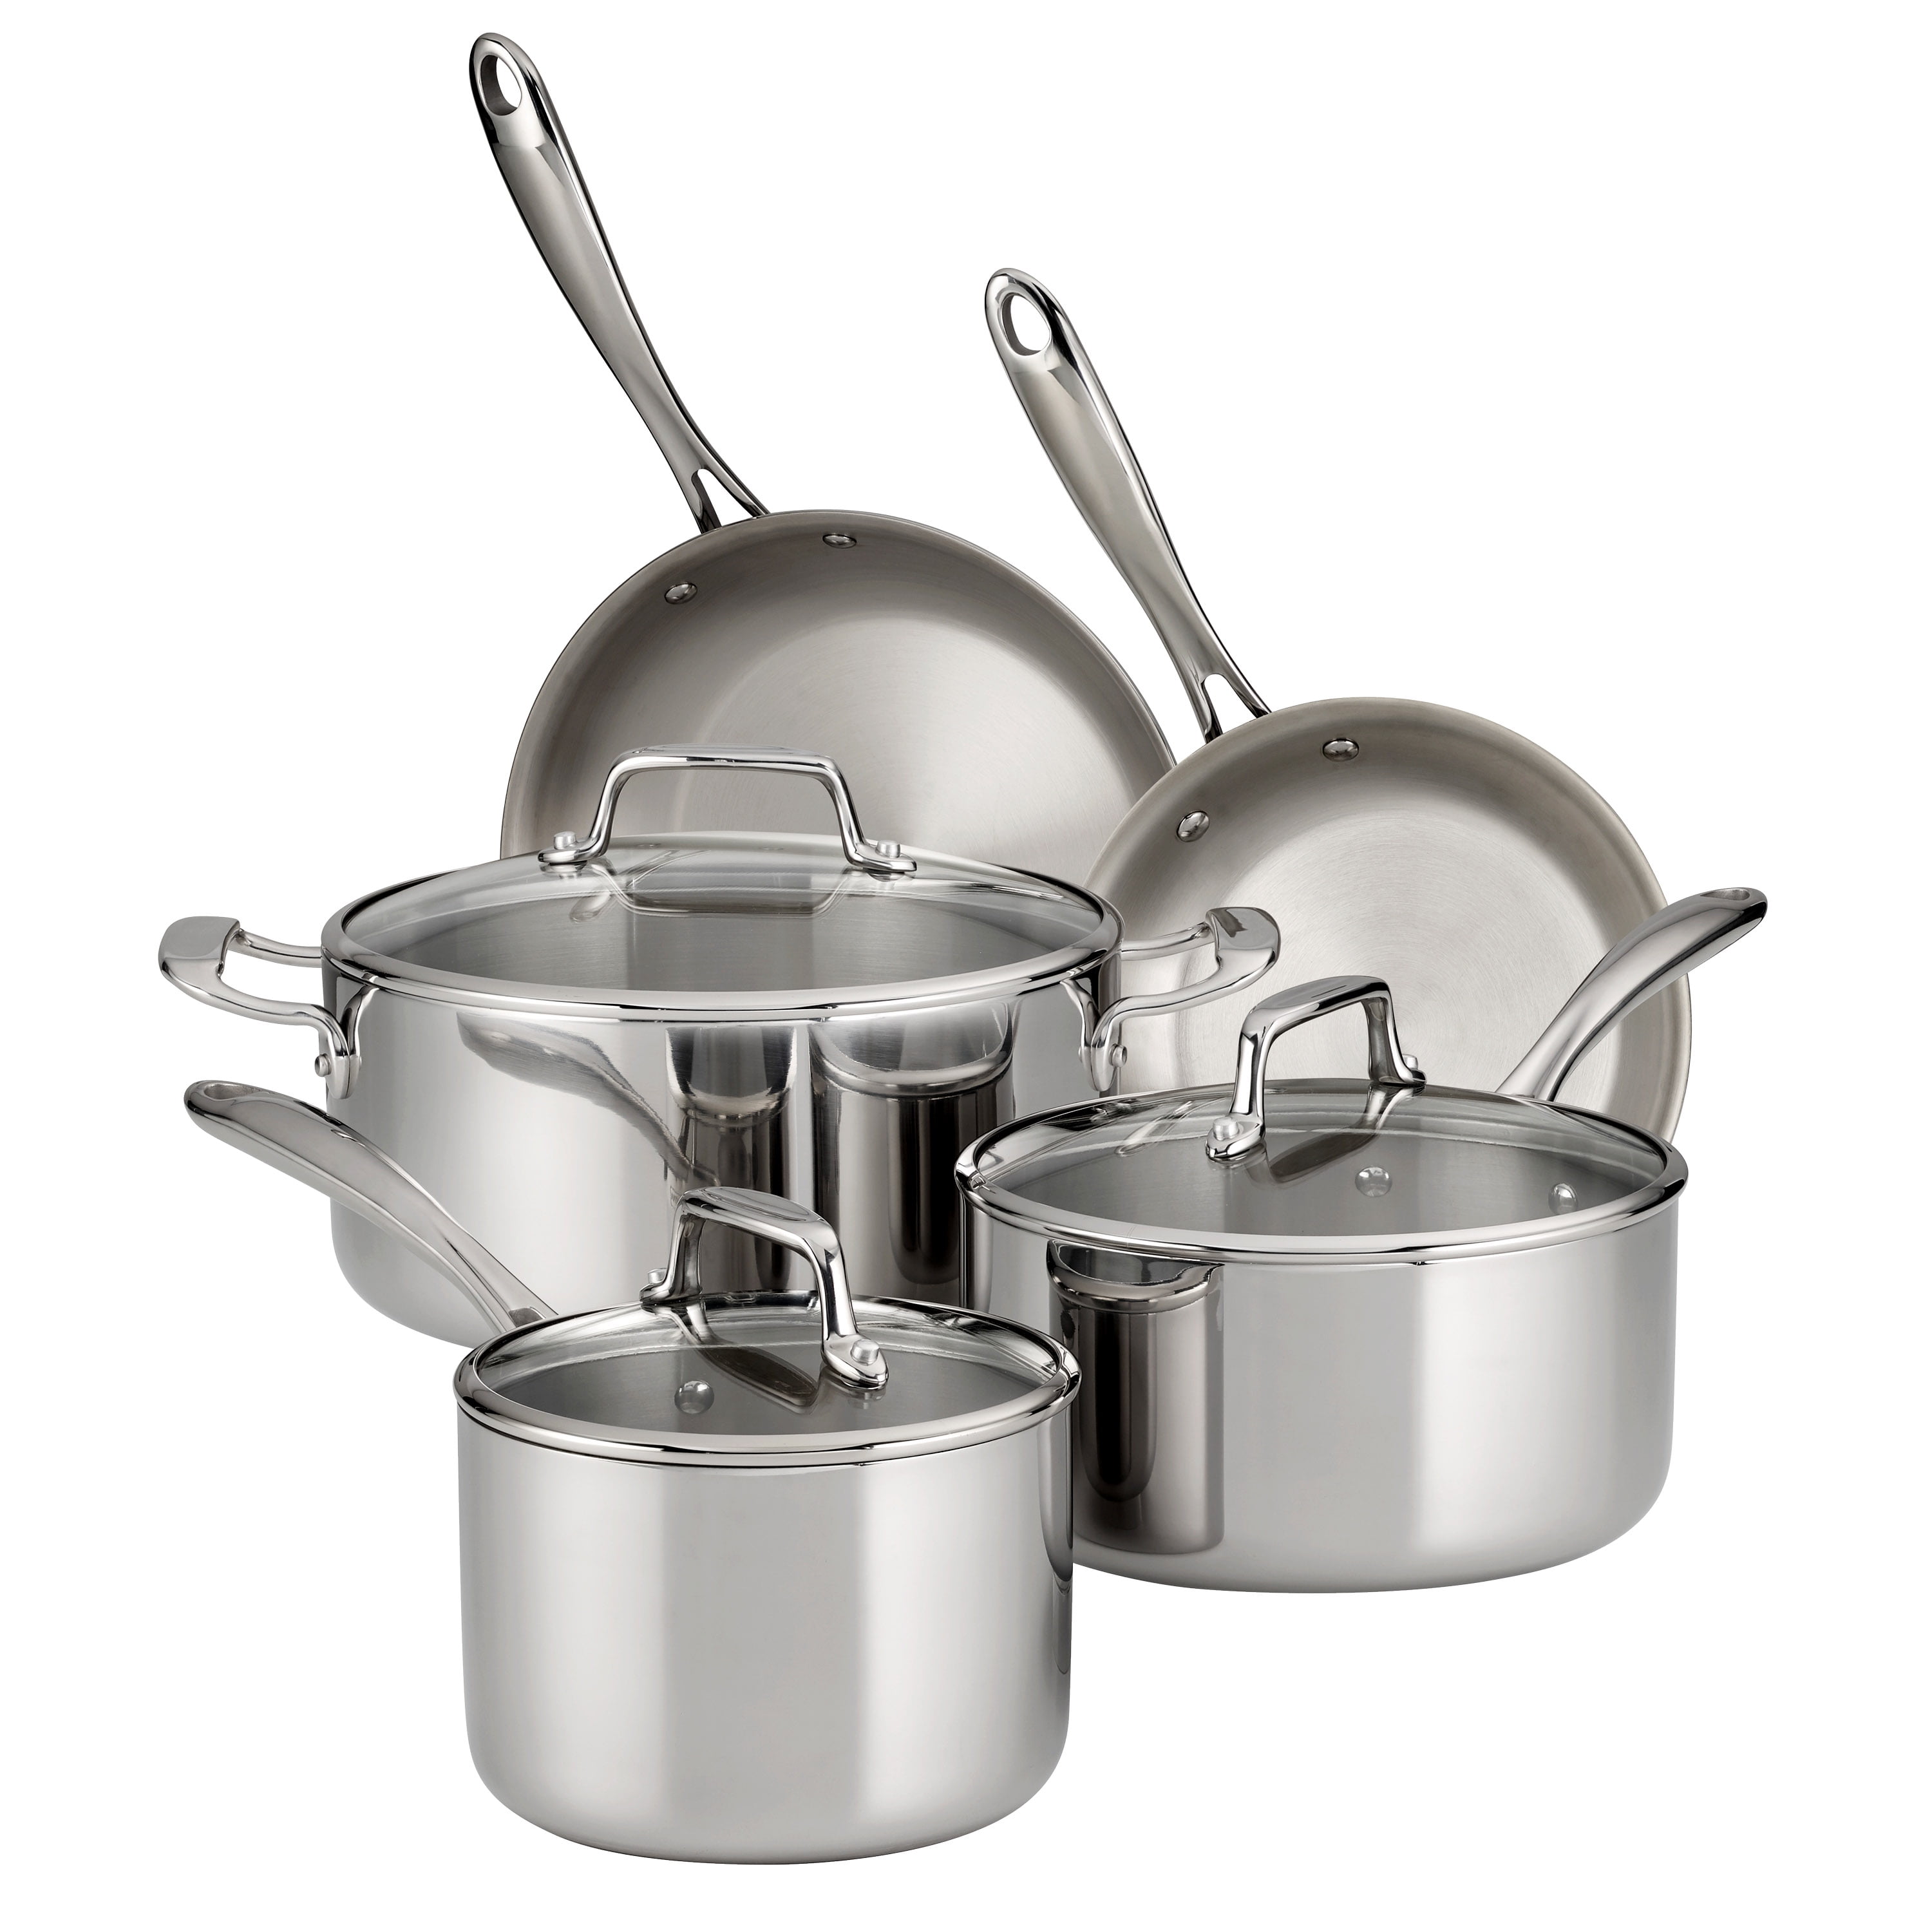 Cookware Set 10-Piece Stainless Steel Tri-Ply Clad Kitchen Frying Pan Oven Safe 